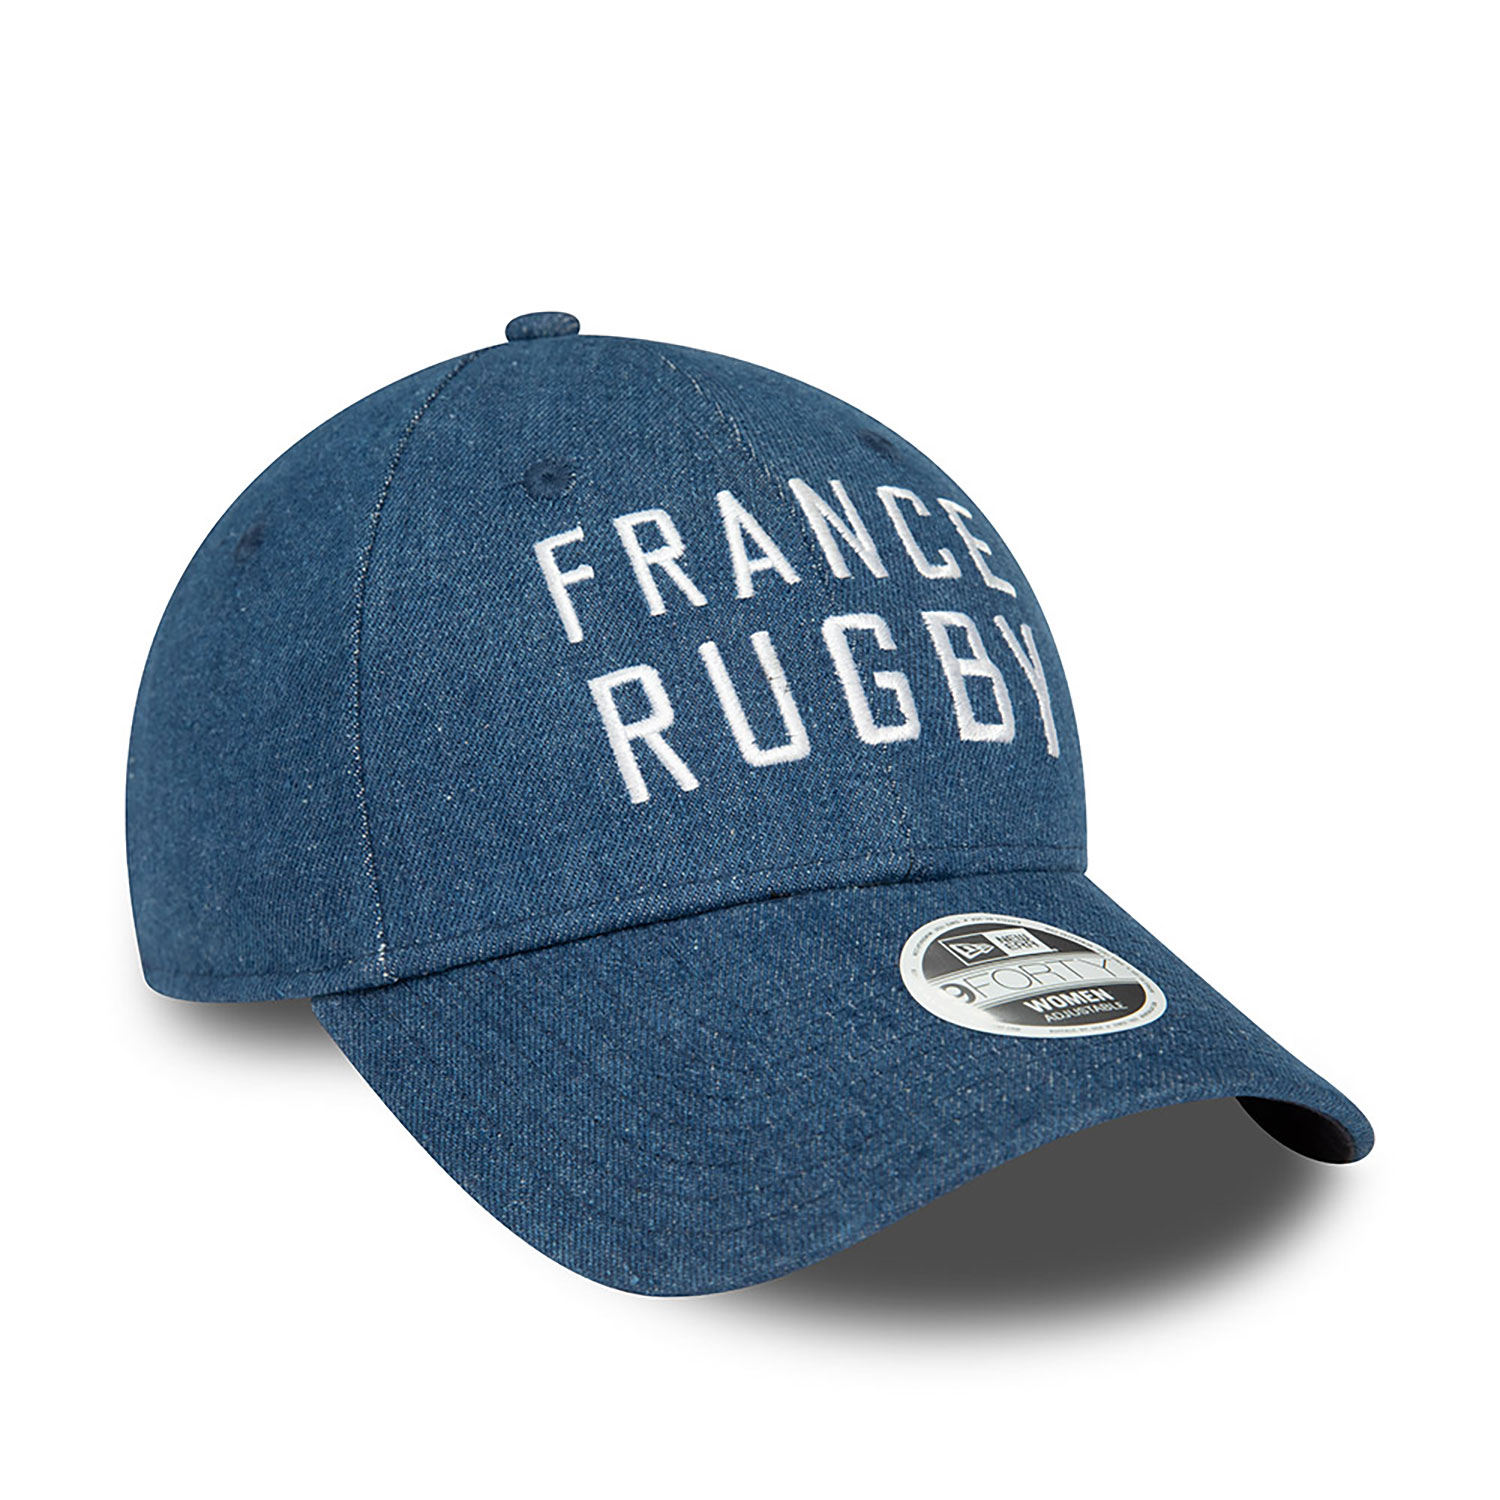 French Federation Of Rugby Womens Denim Blue 9FORTY Adjustable Cap